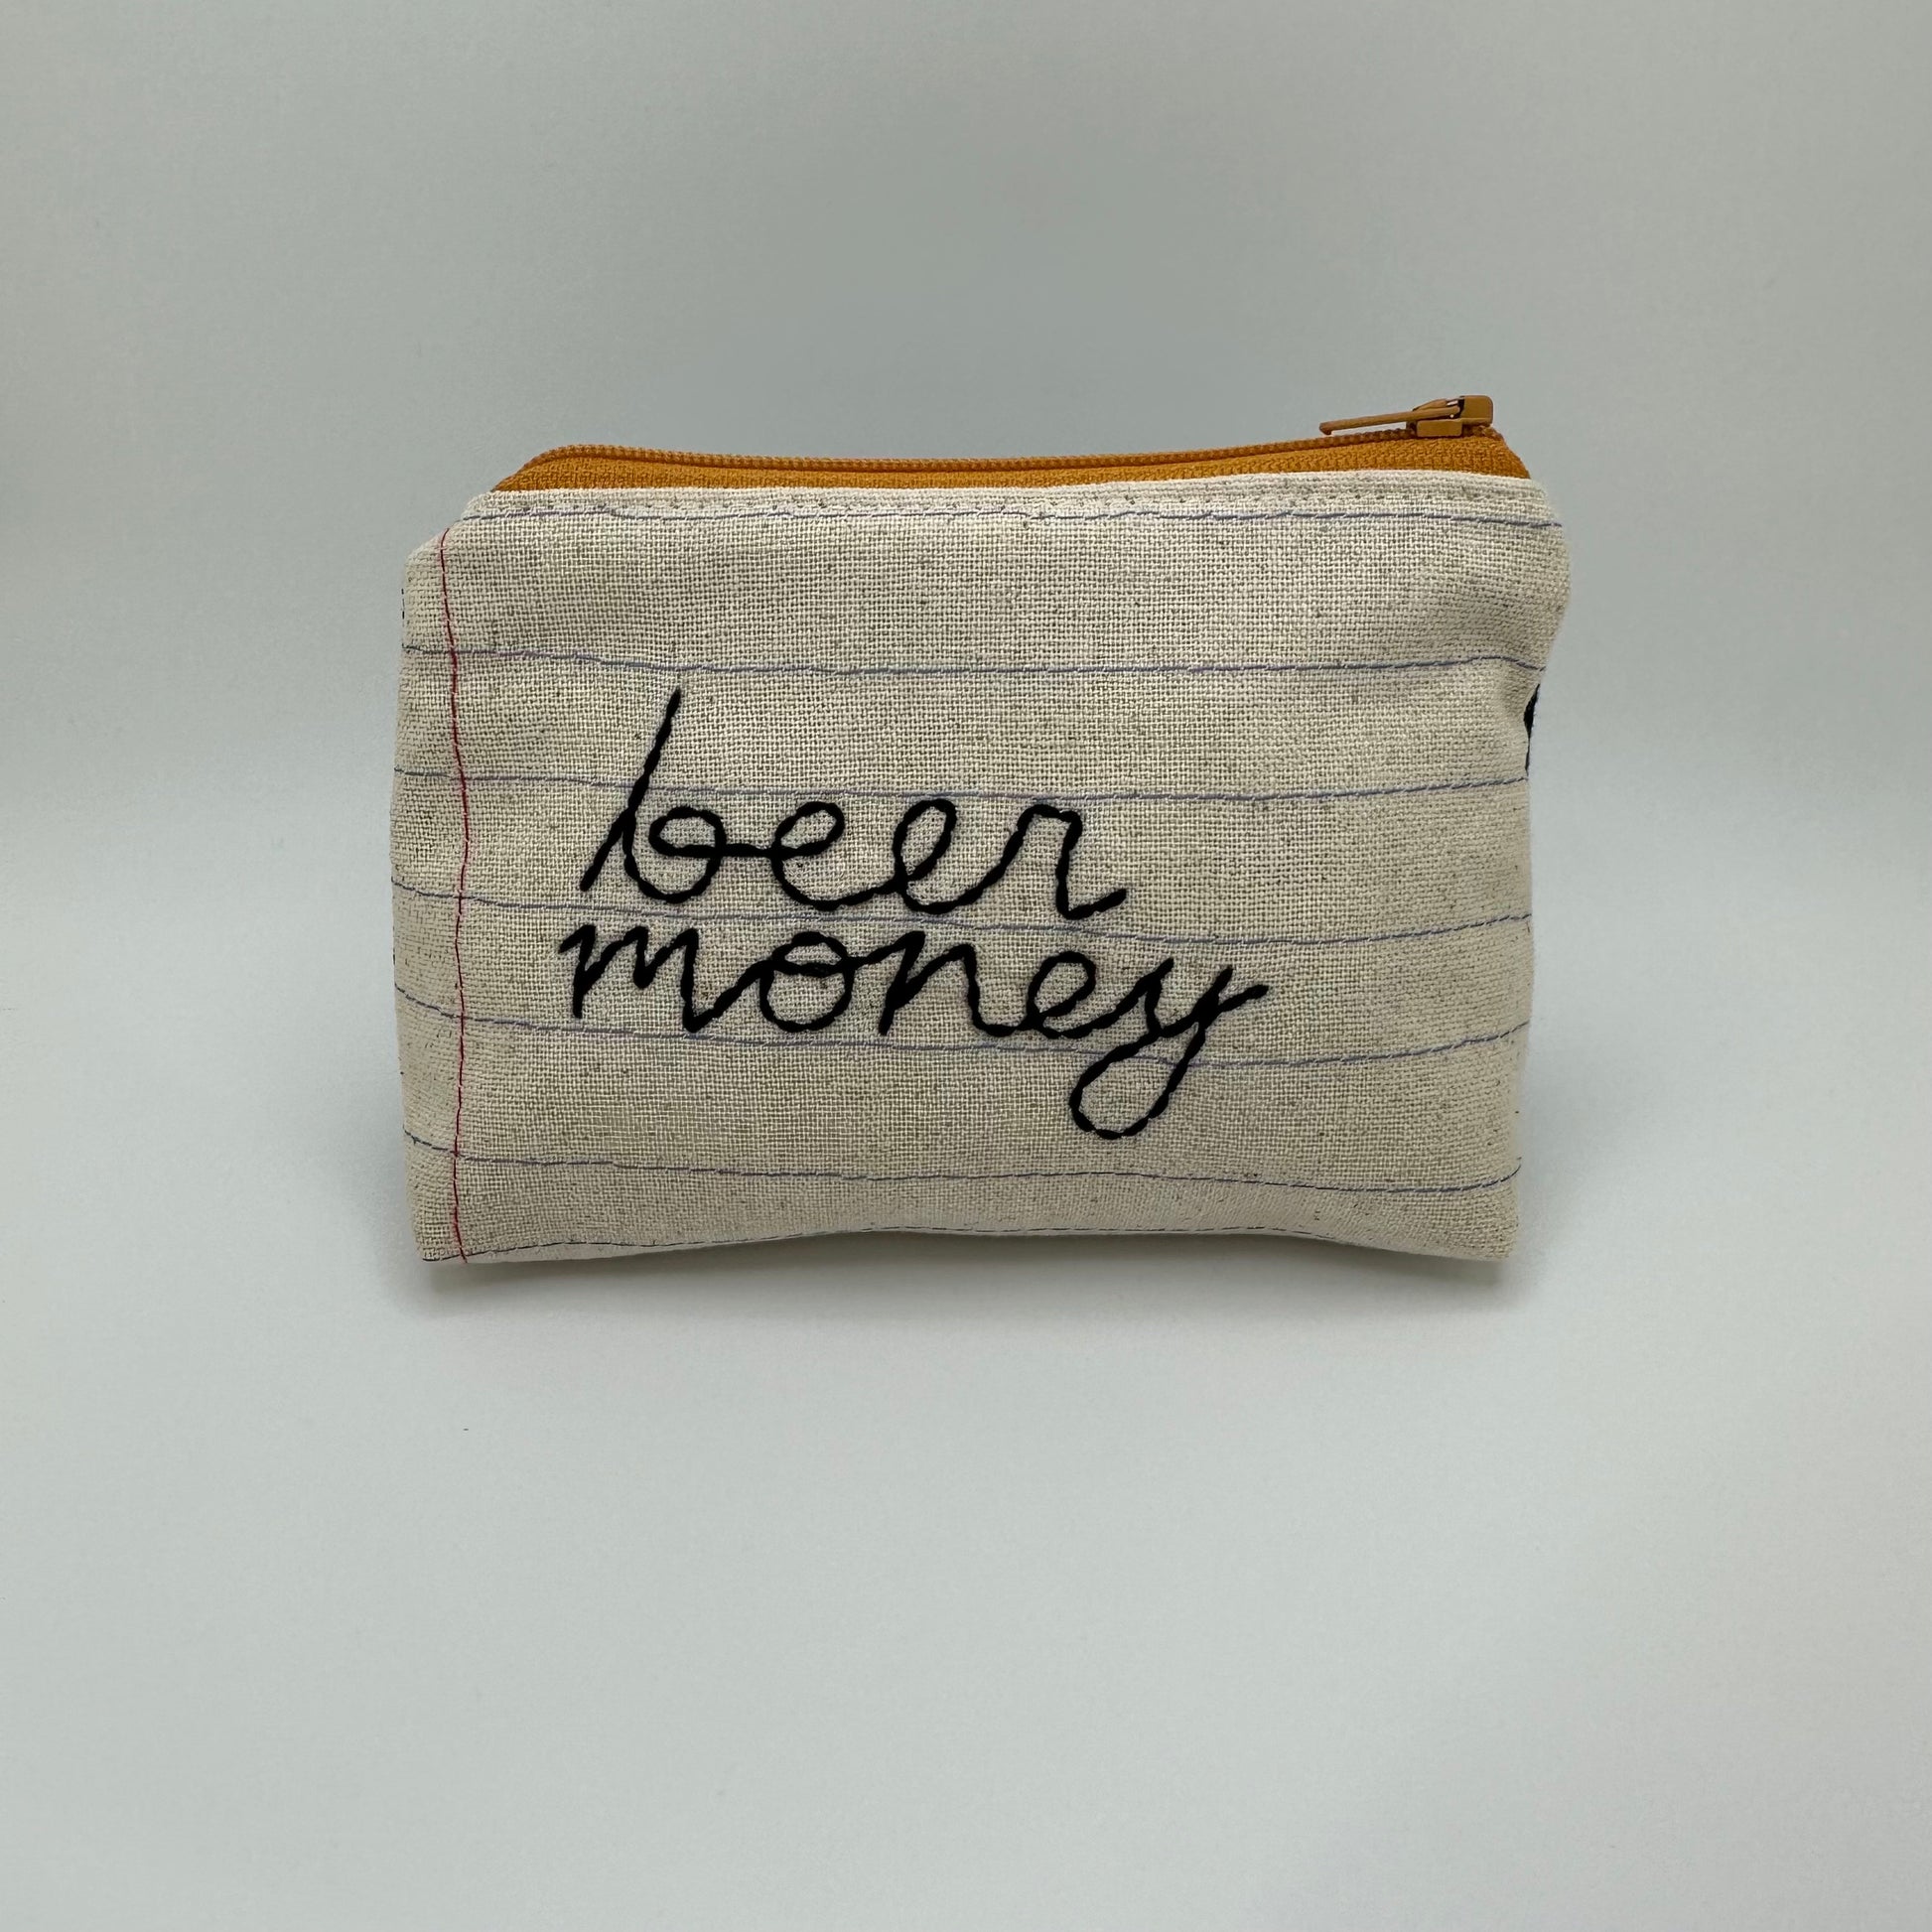 Handmade pouch sewn with the words "beer money"